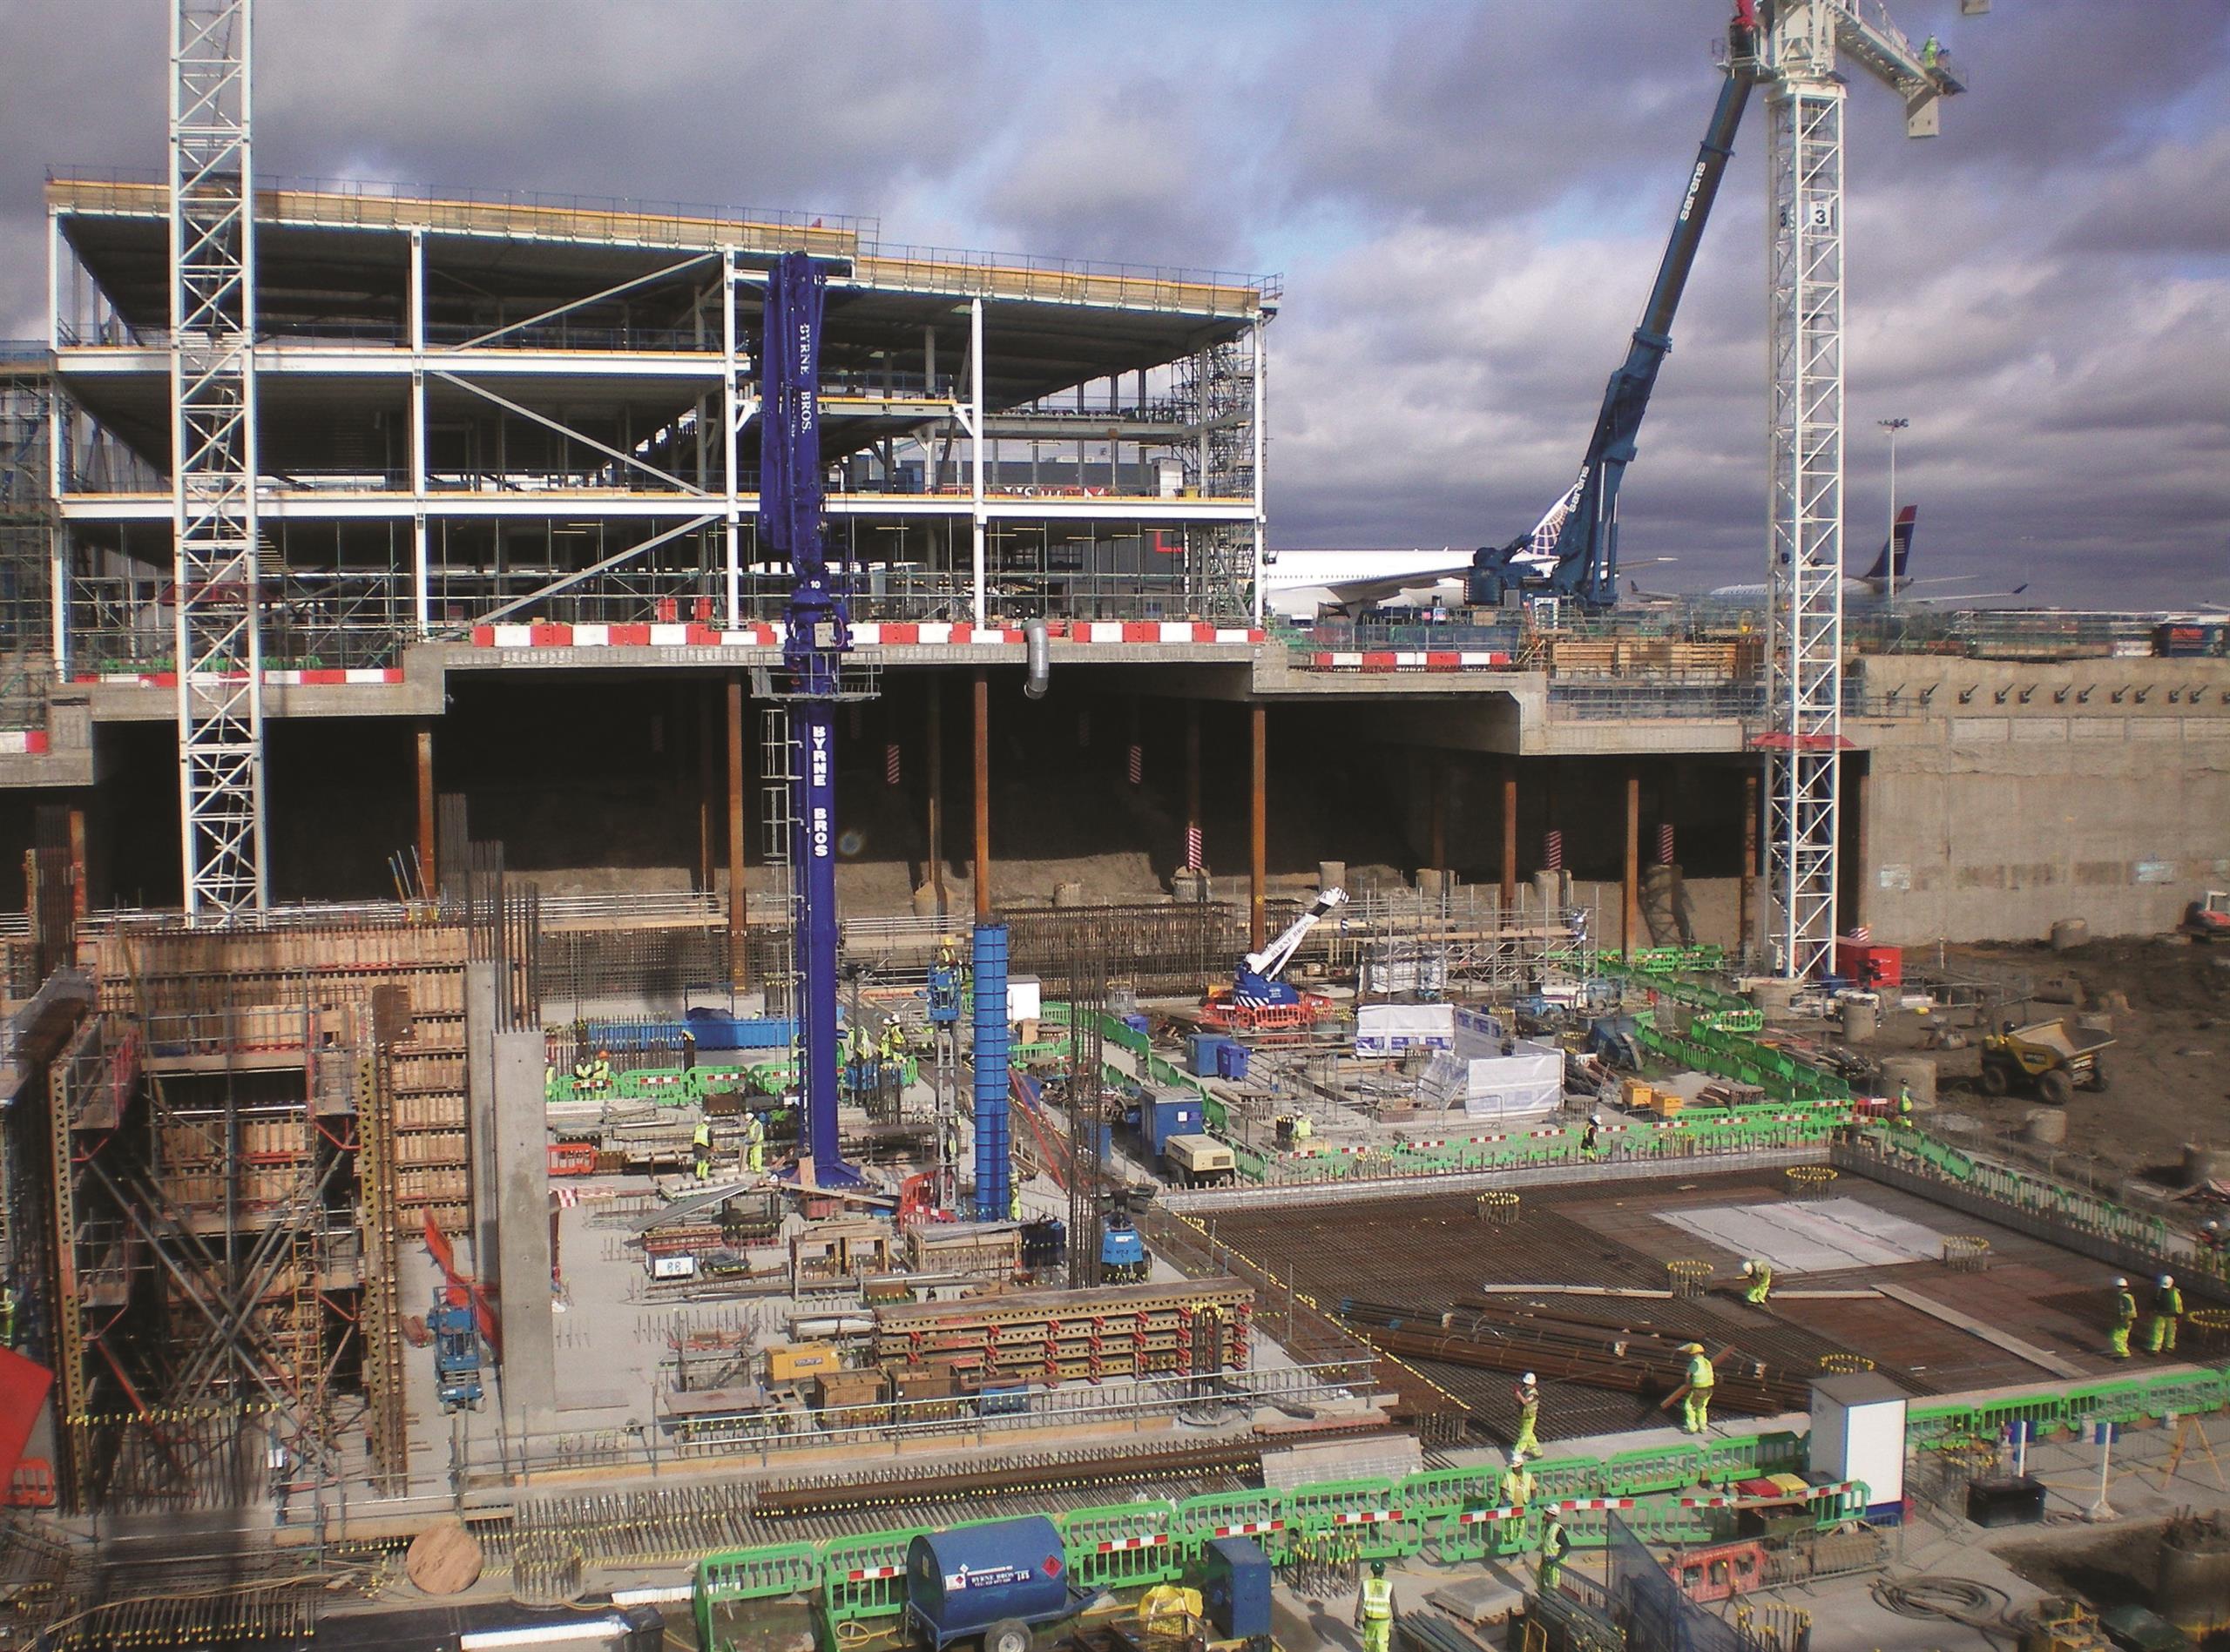 View of the terminal under construction